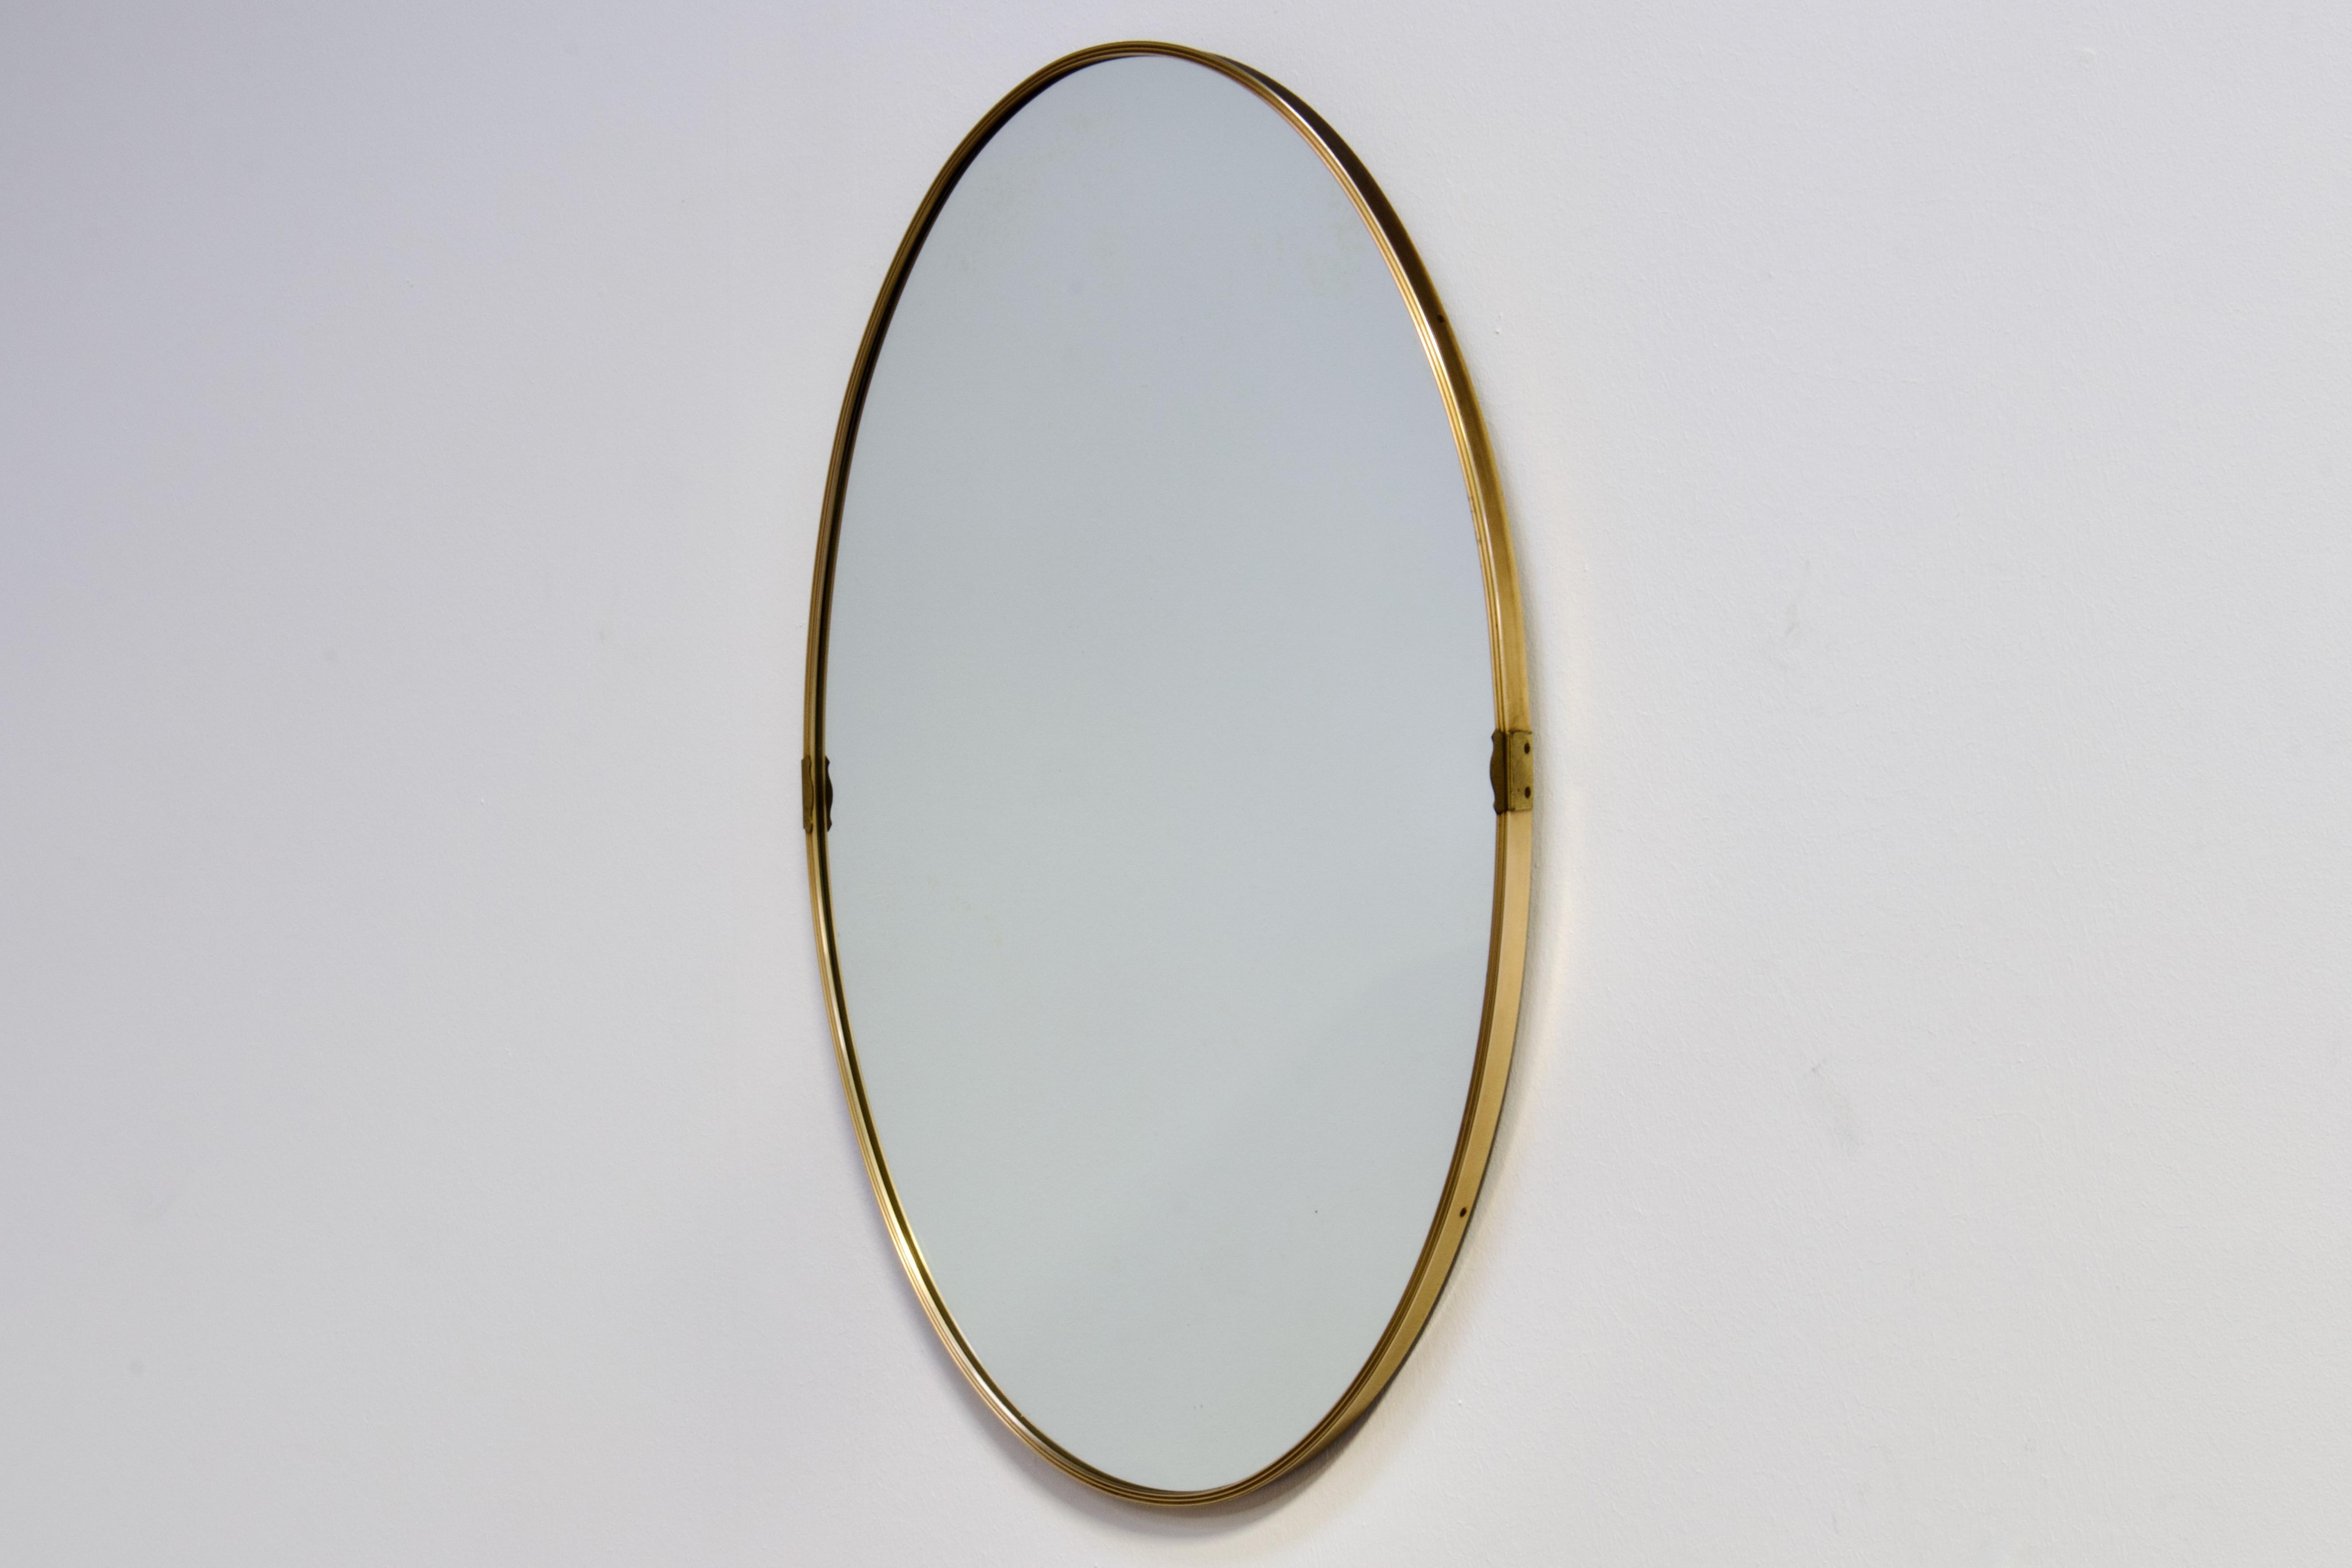 Large Gio Ponti era Mid-Century Modern wall mirror in patinated brass. Made in Italy in 1950s.

The shape of the mirror is a very elegant oval, symmetrical both horizontally and vertically. The face of the brass frame is ridged to give a subtle but